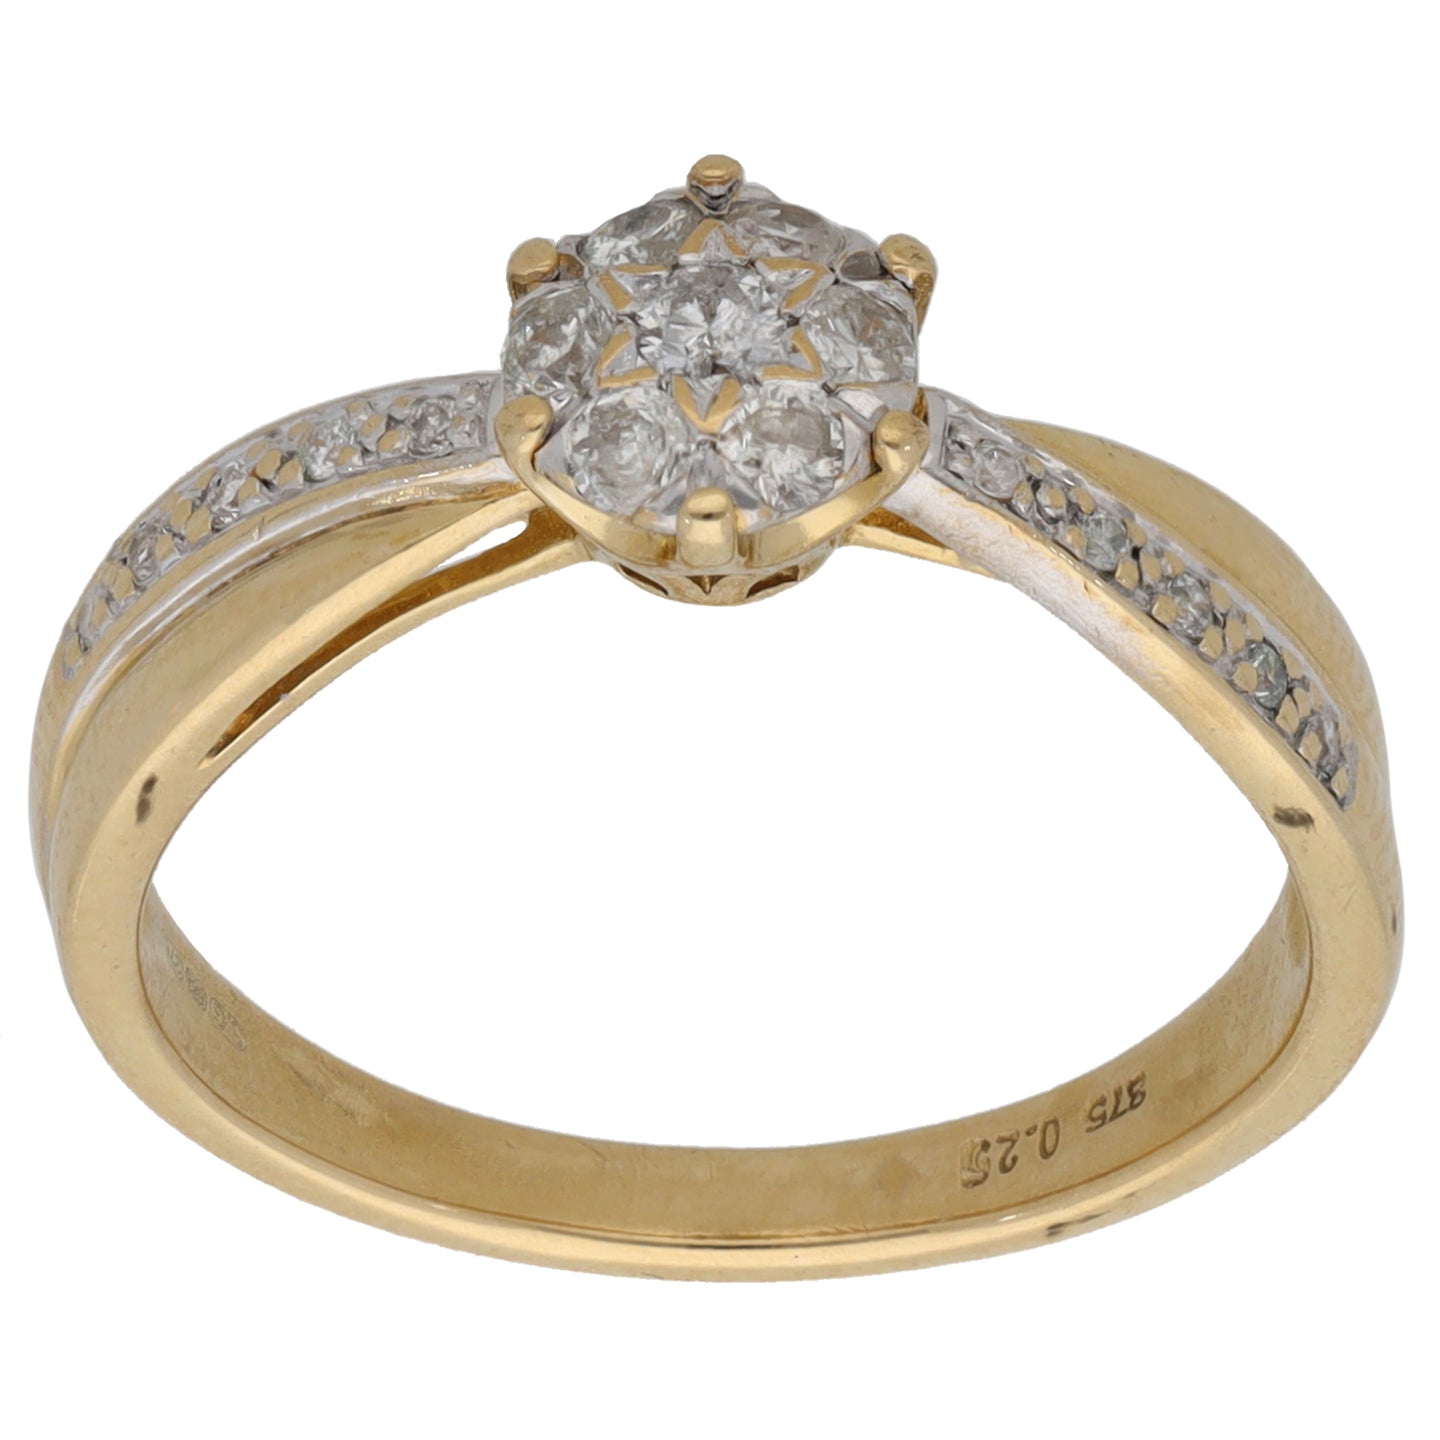 9ct Gold 0.25ct Diamond Dress/Cocktail Ring Size N